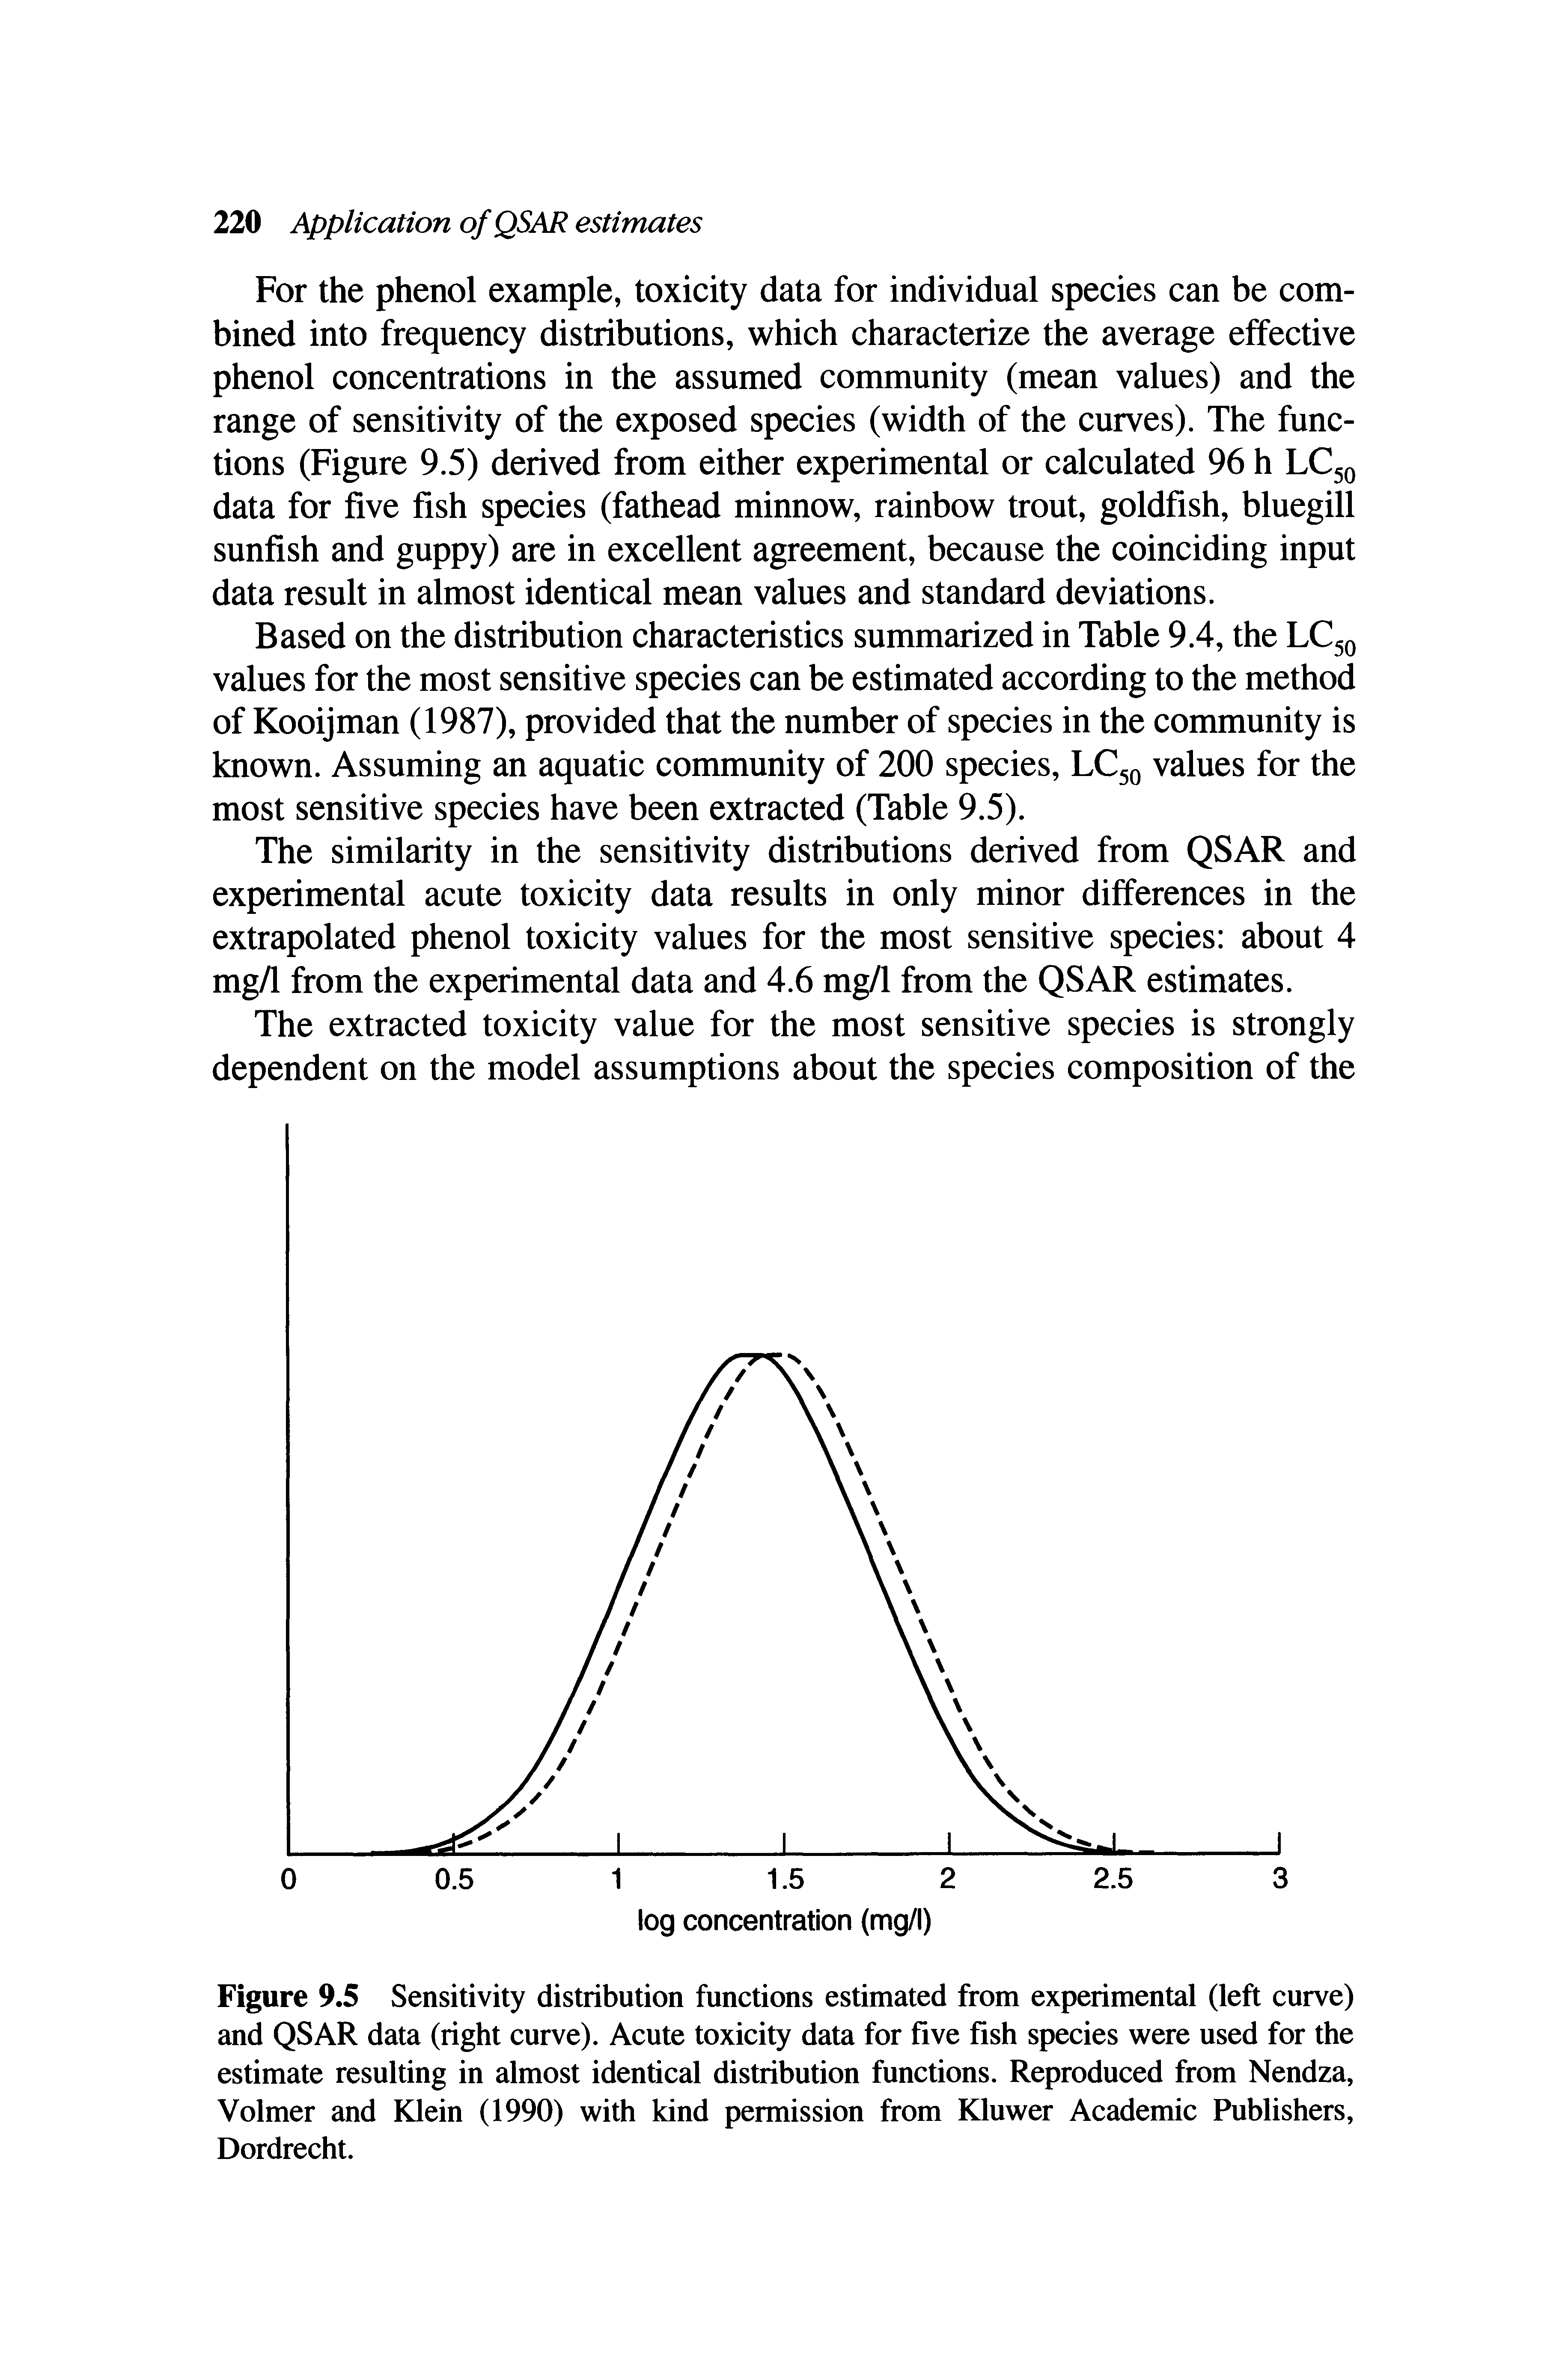 Figure 9.5 Sensitivity distribution functions estimated from experimental (left curve) and QSAR data (right curve). Acute toxicity data for five fish species were used for the estimate resulting in almost identical distribution functions. Reproduced from Nendza, Volmer and Klein (1990) with kind permission from Kluwer Academic Publishers, Dordrecht.